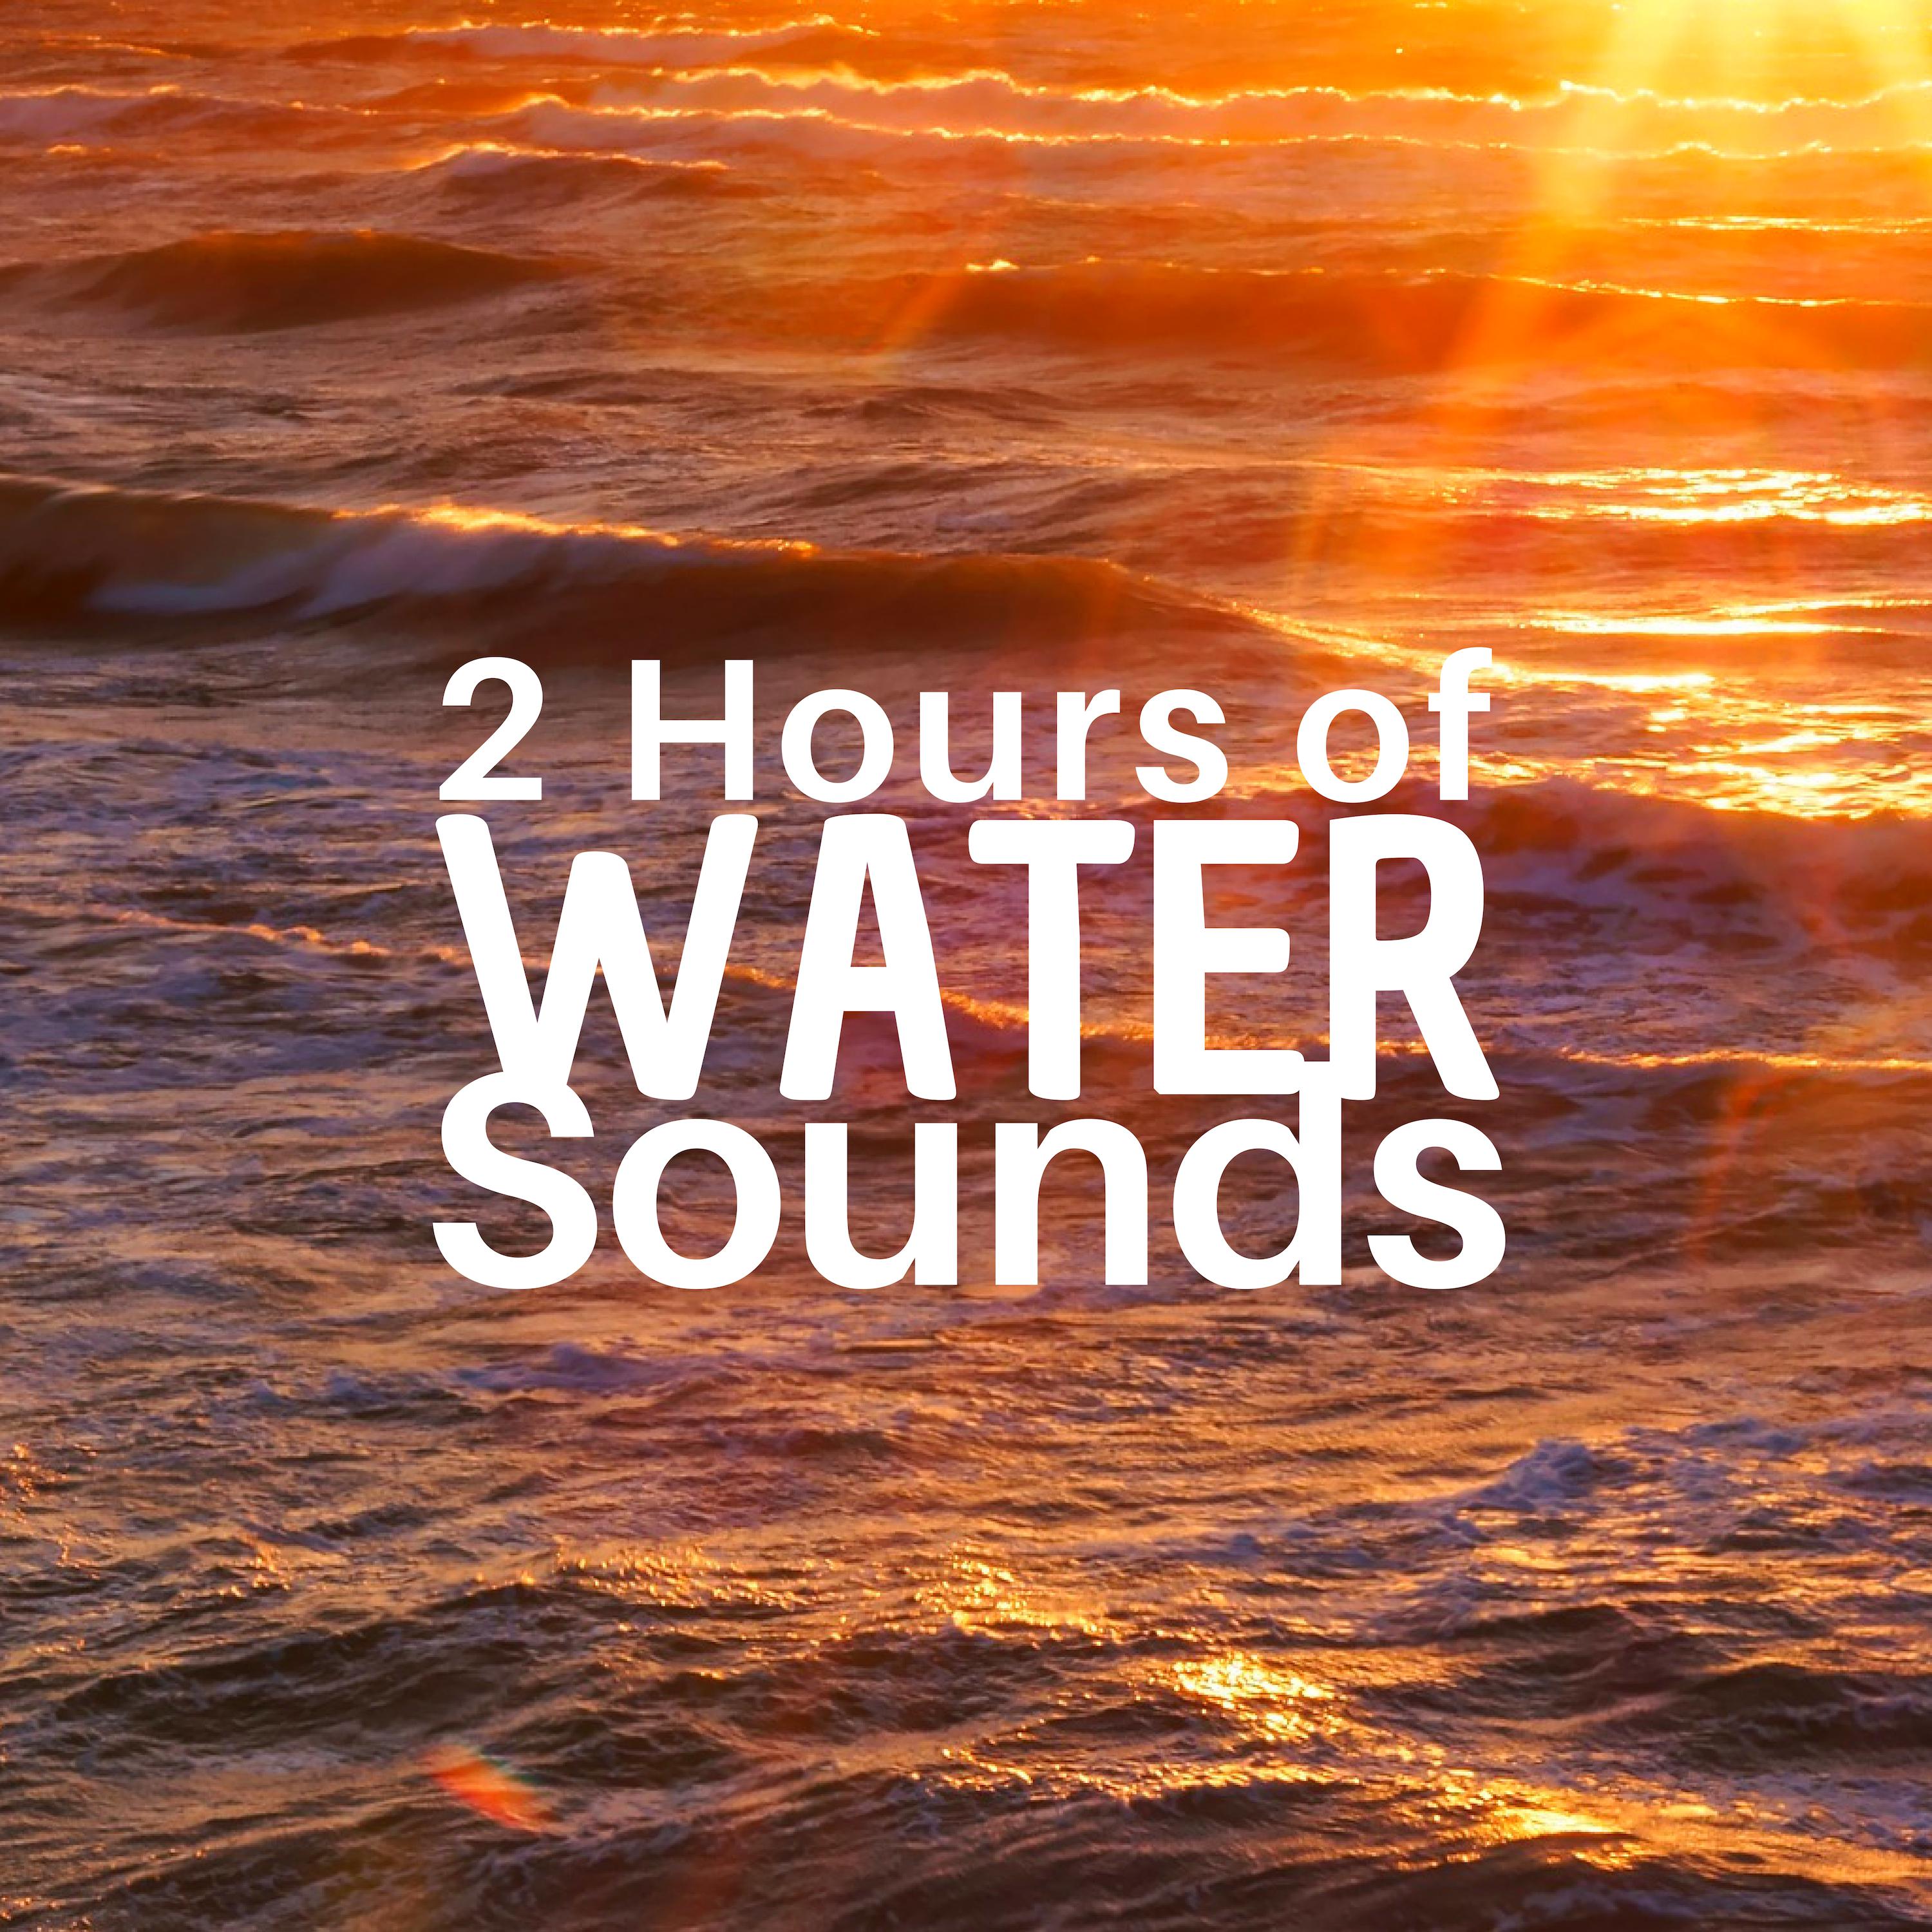 2 Hours of Water Sounds - Ethnic Music from Asia